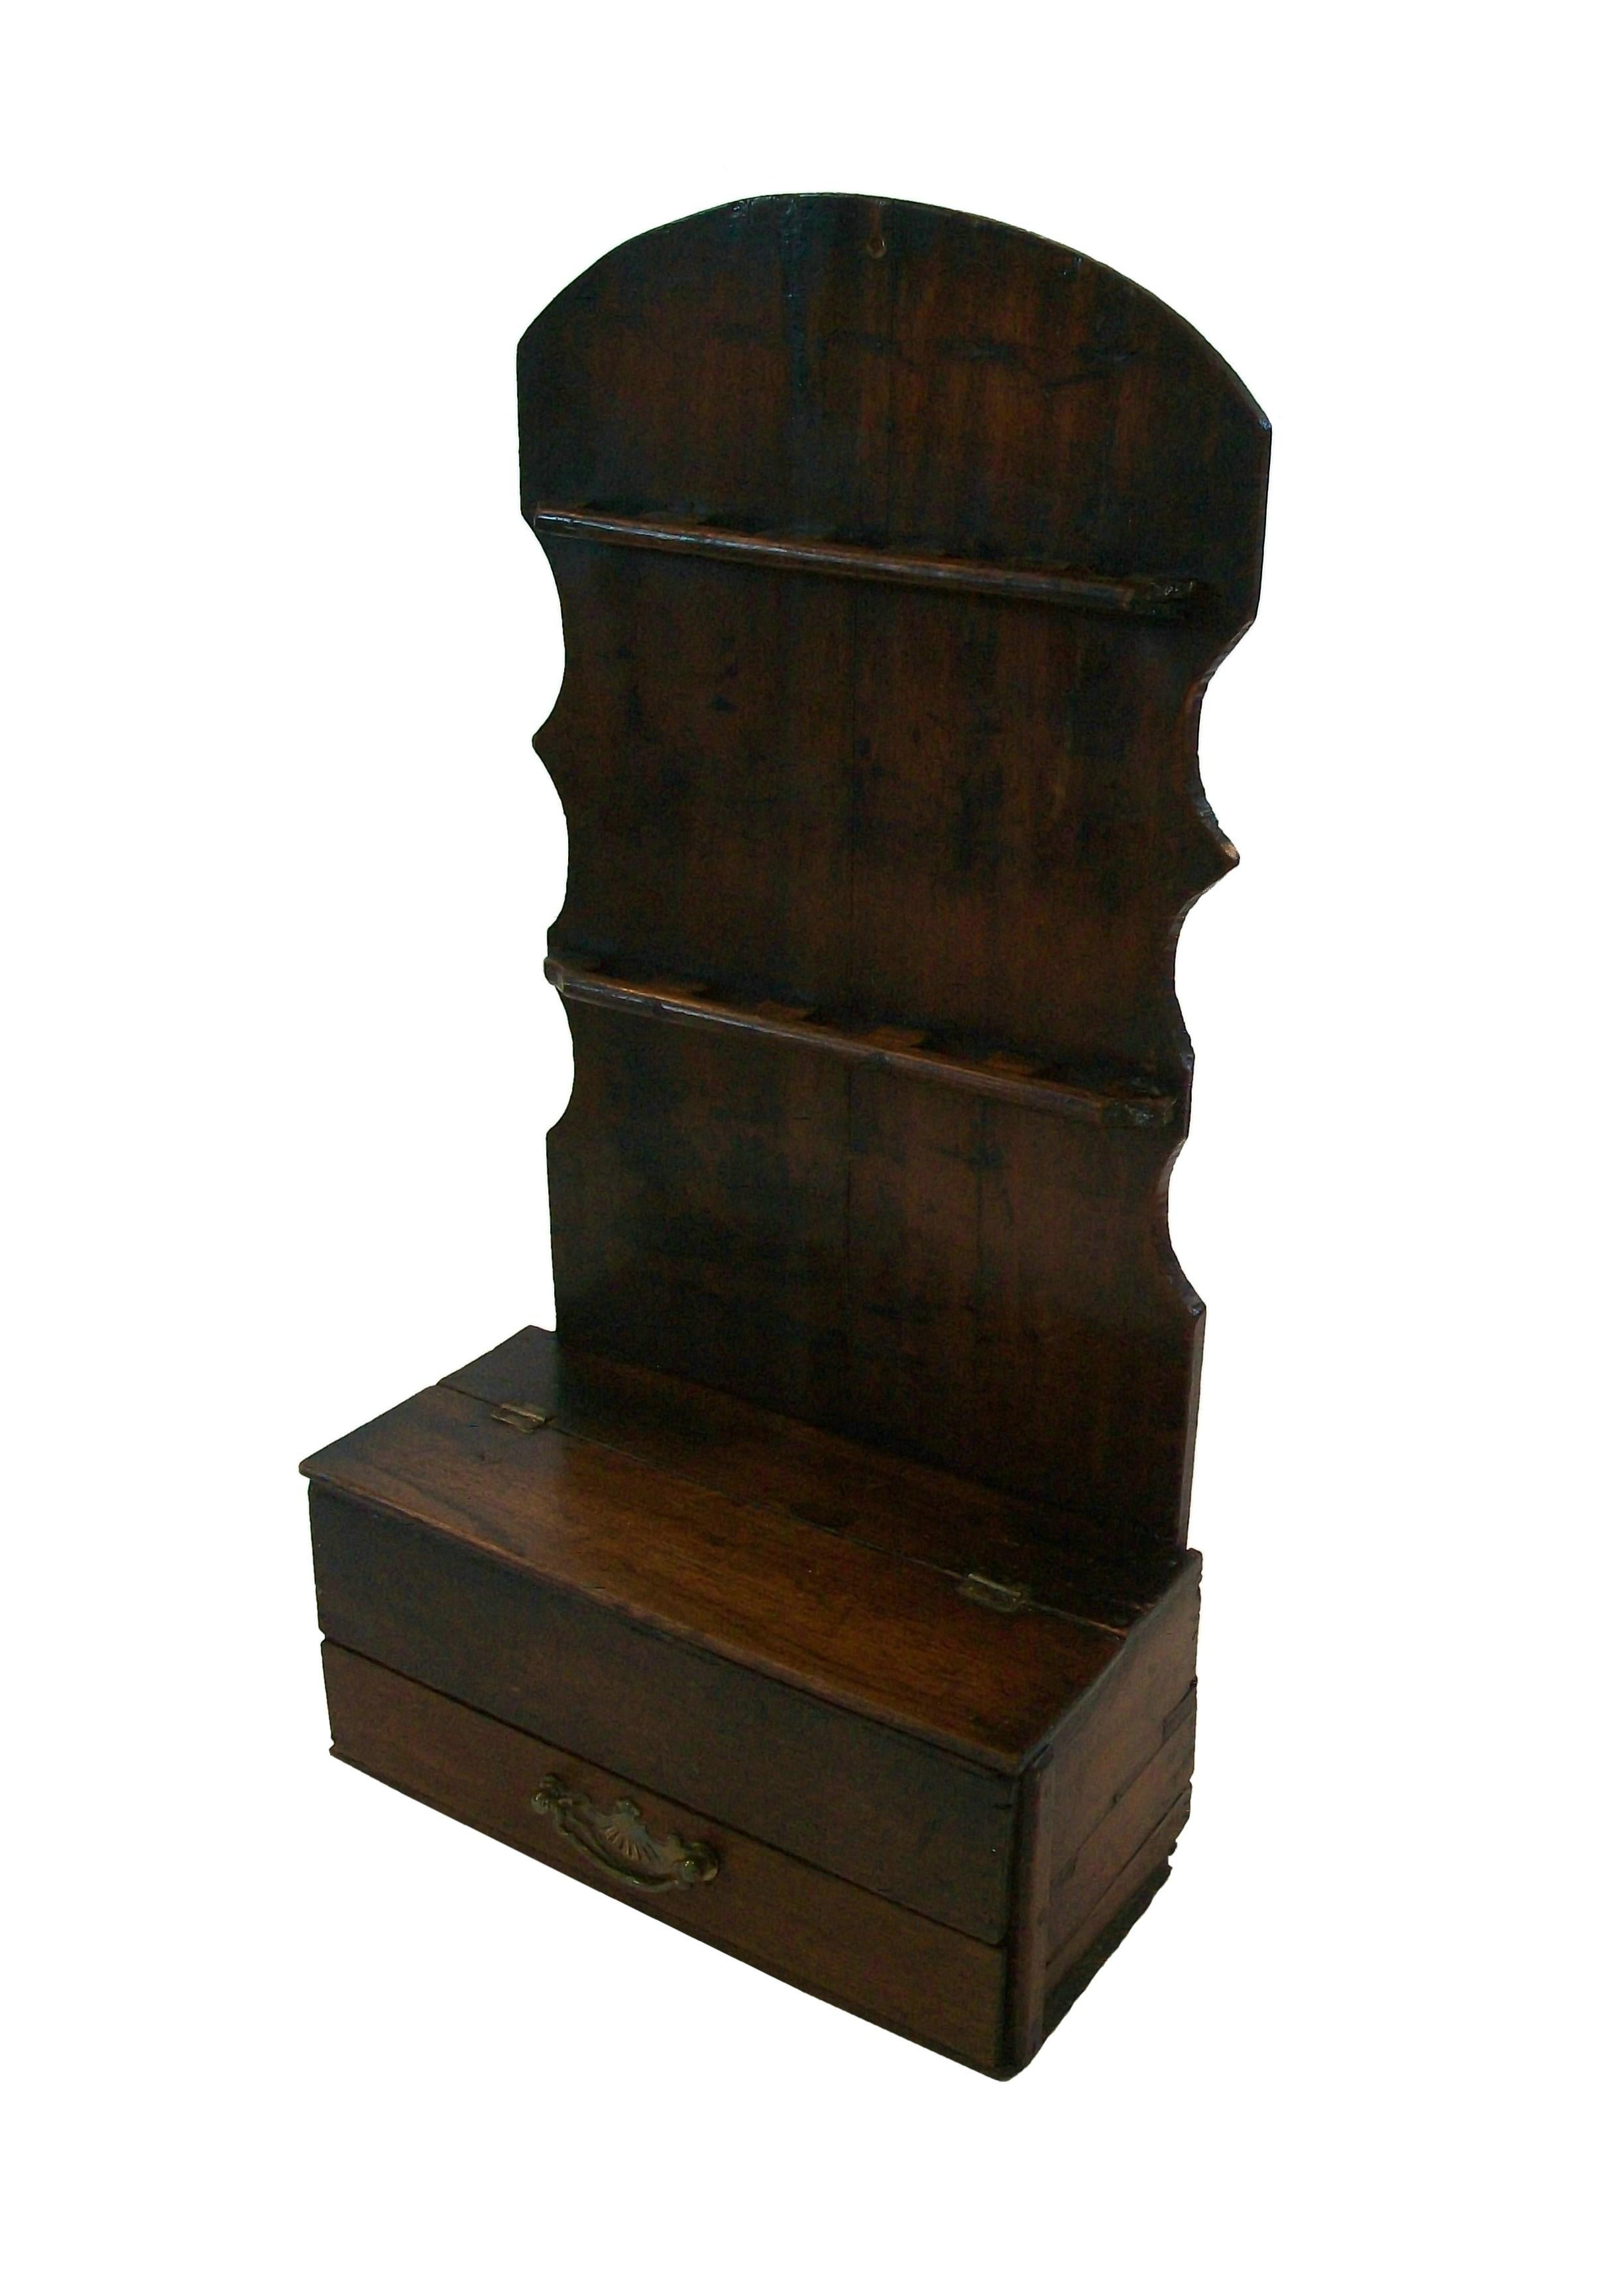 Georgian English Oak spoon rack with a dark brown stain and warm aged patina - table/counter placement or wall mounted - featuring a lower drawer with brass pull handle (replaced) and a hinged box to the top of the base - appears to be the original